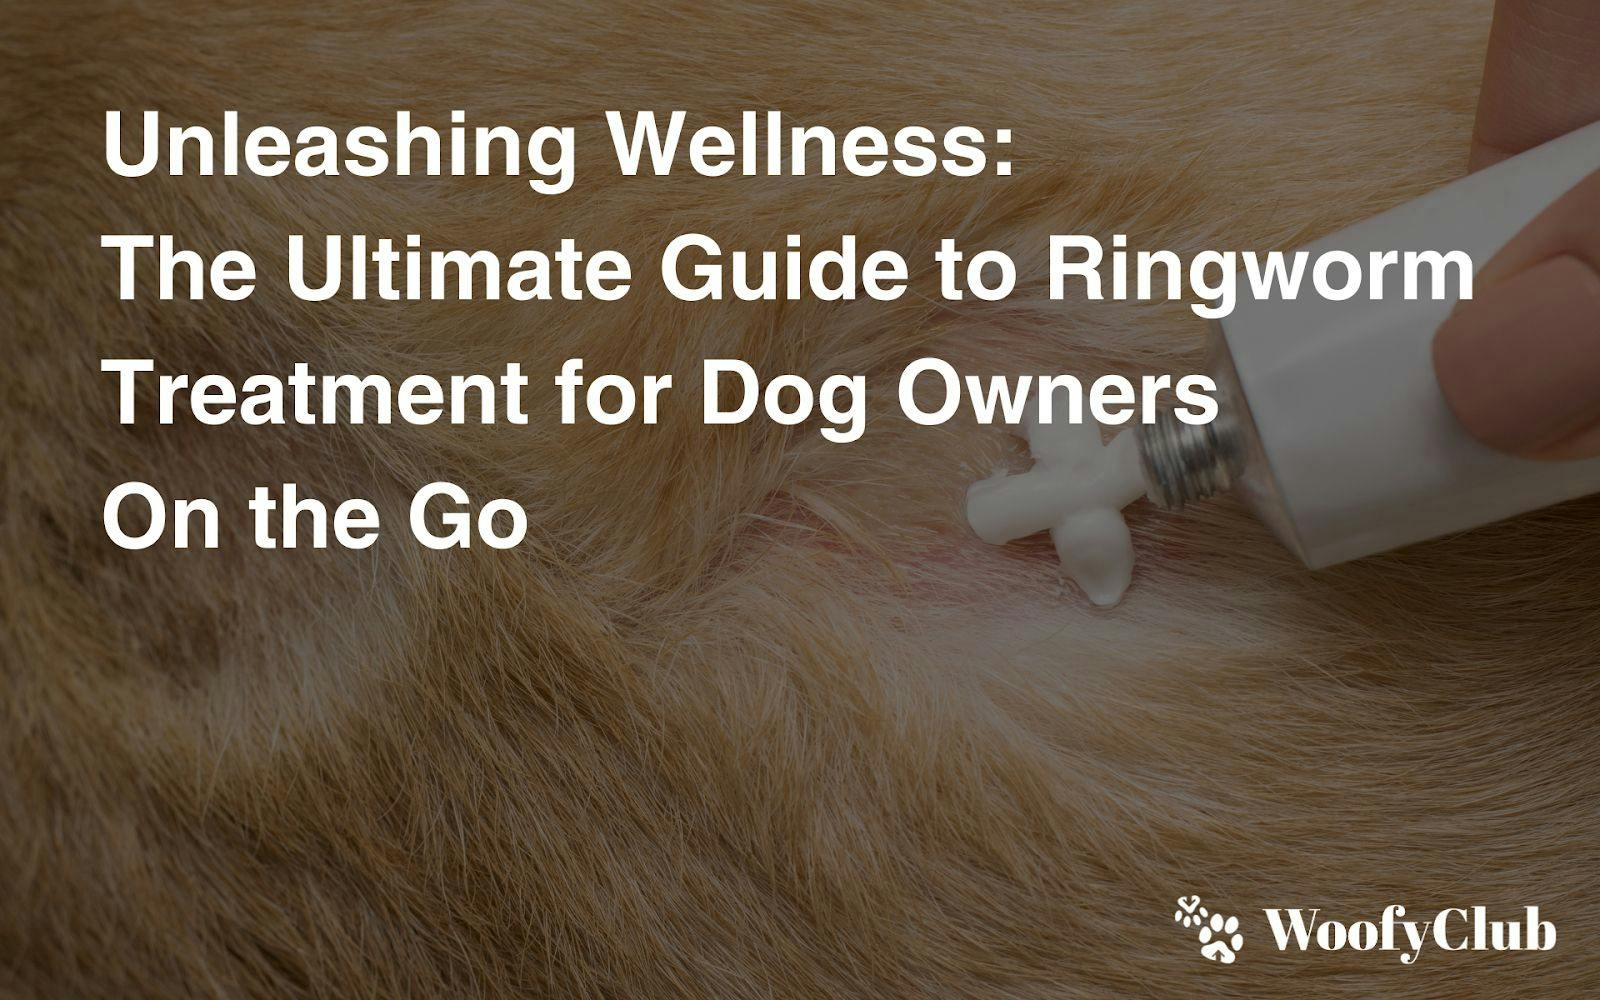 Unleashing Wellness: The Ultimate Guide To Ringworm Treatment For Dog Owners On The Go